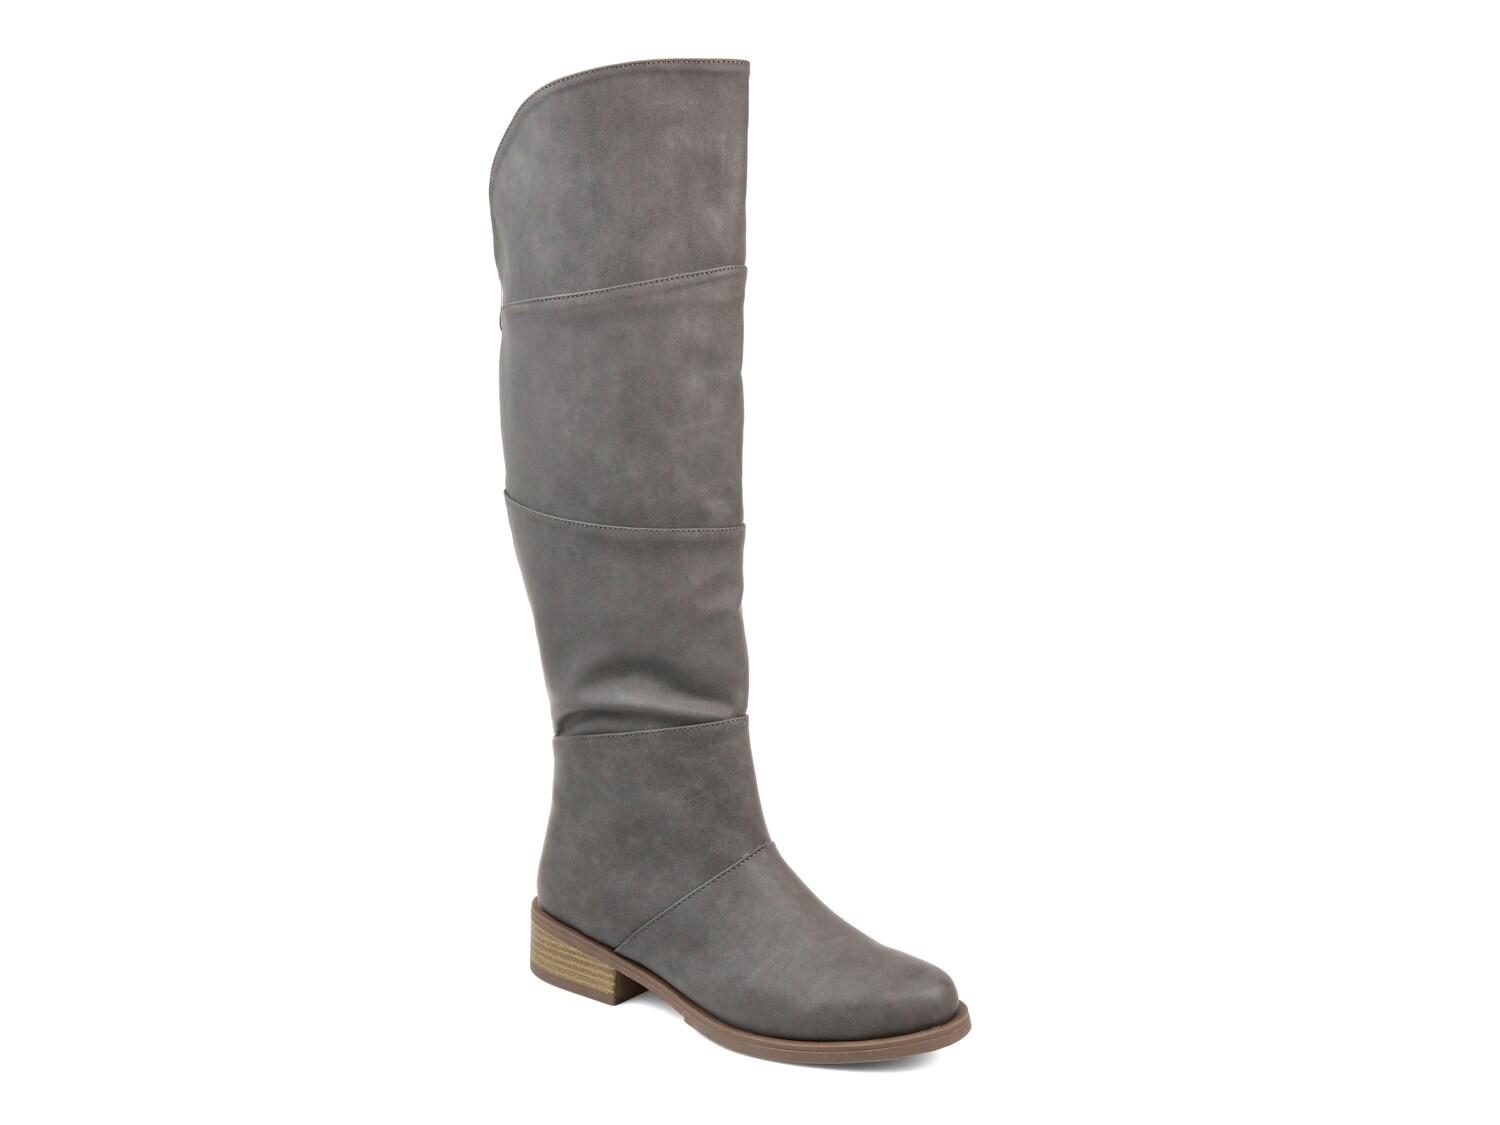 Journee Collection Vanesa Extra Wide Calf Riding Boot - Free Shipping | DSW